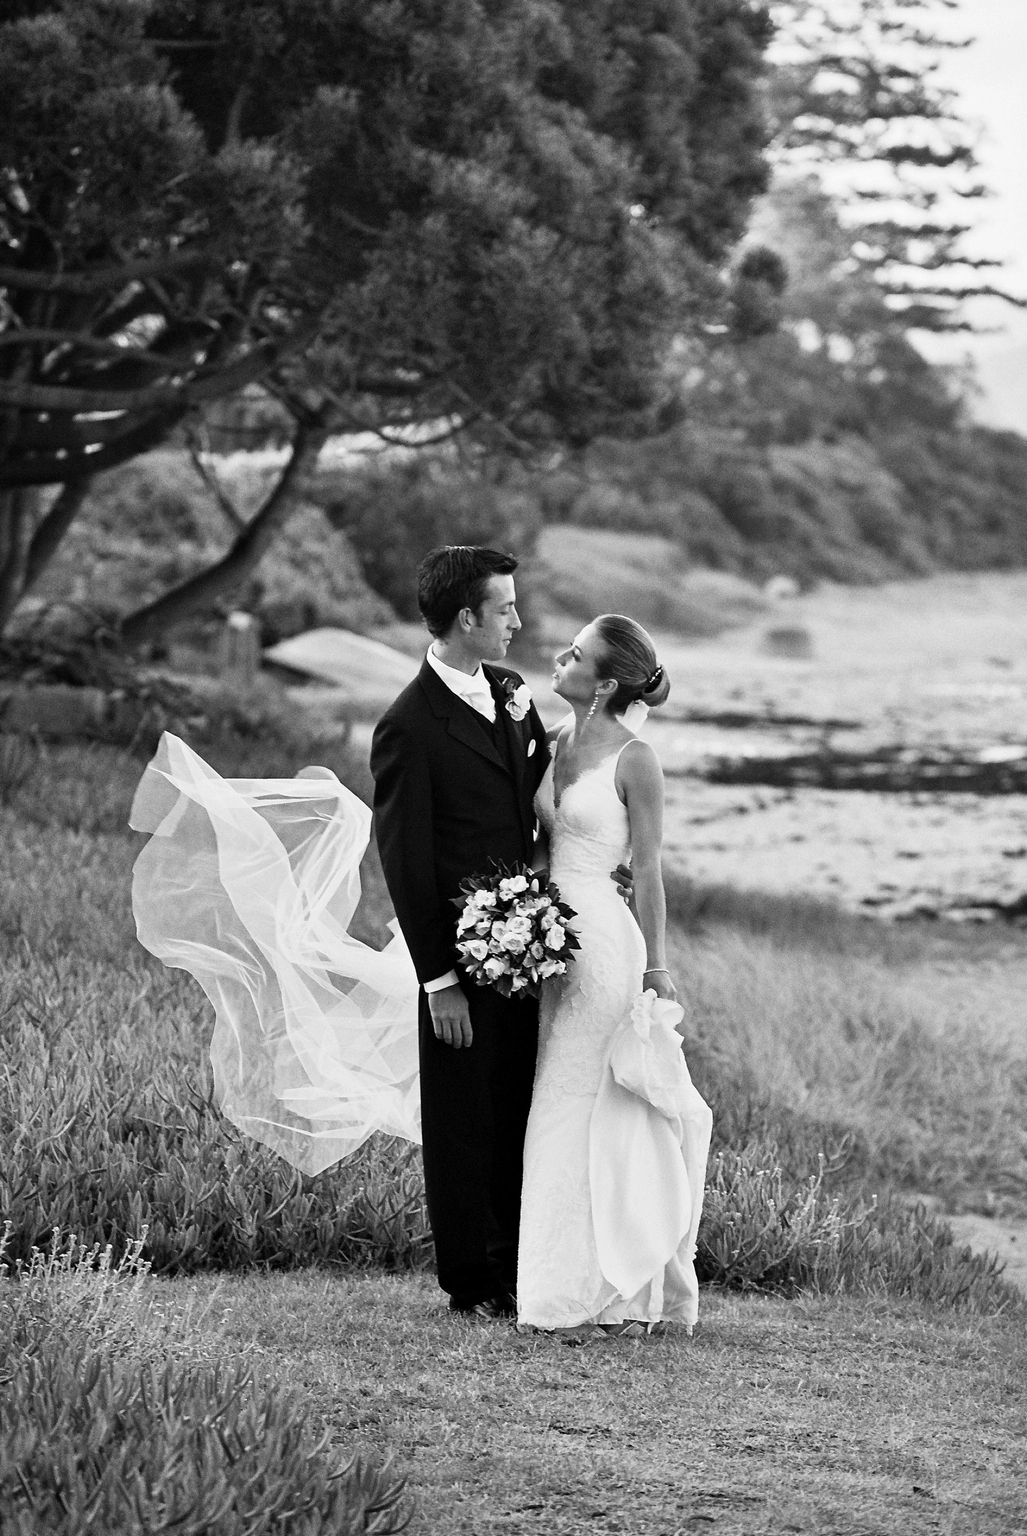 Sarhn - Bride and groom at the beach relax and talk while the wind blows photograph